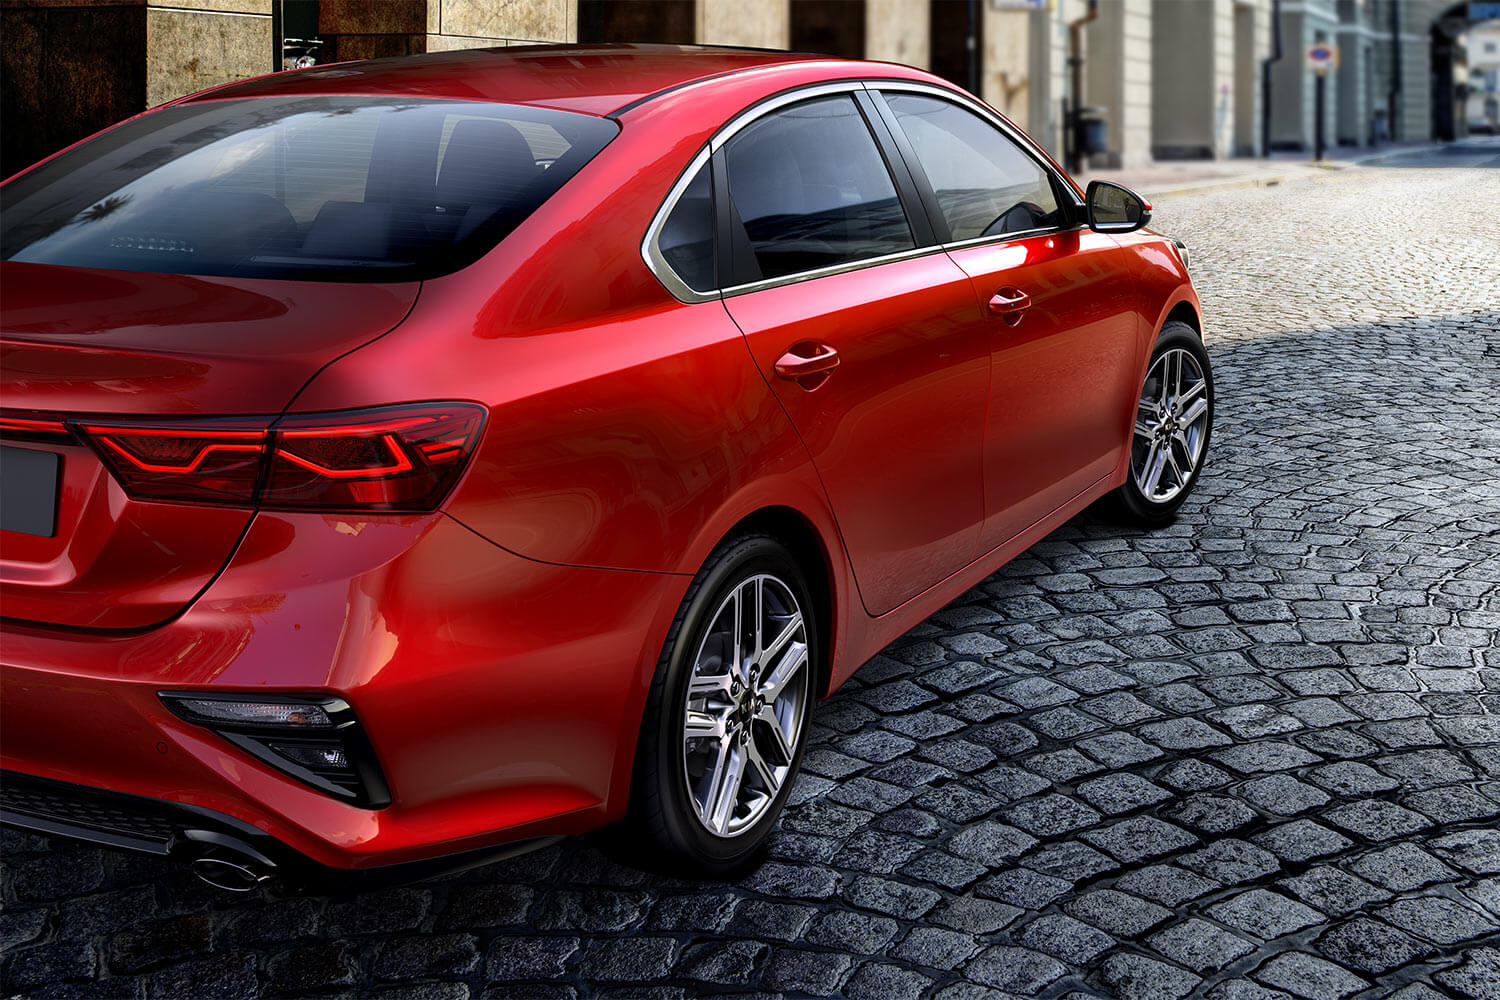 2019 Kia Forte EX Limited Review